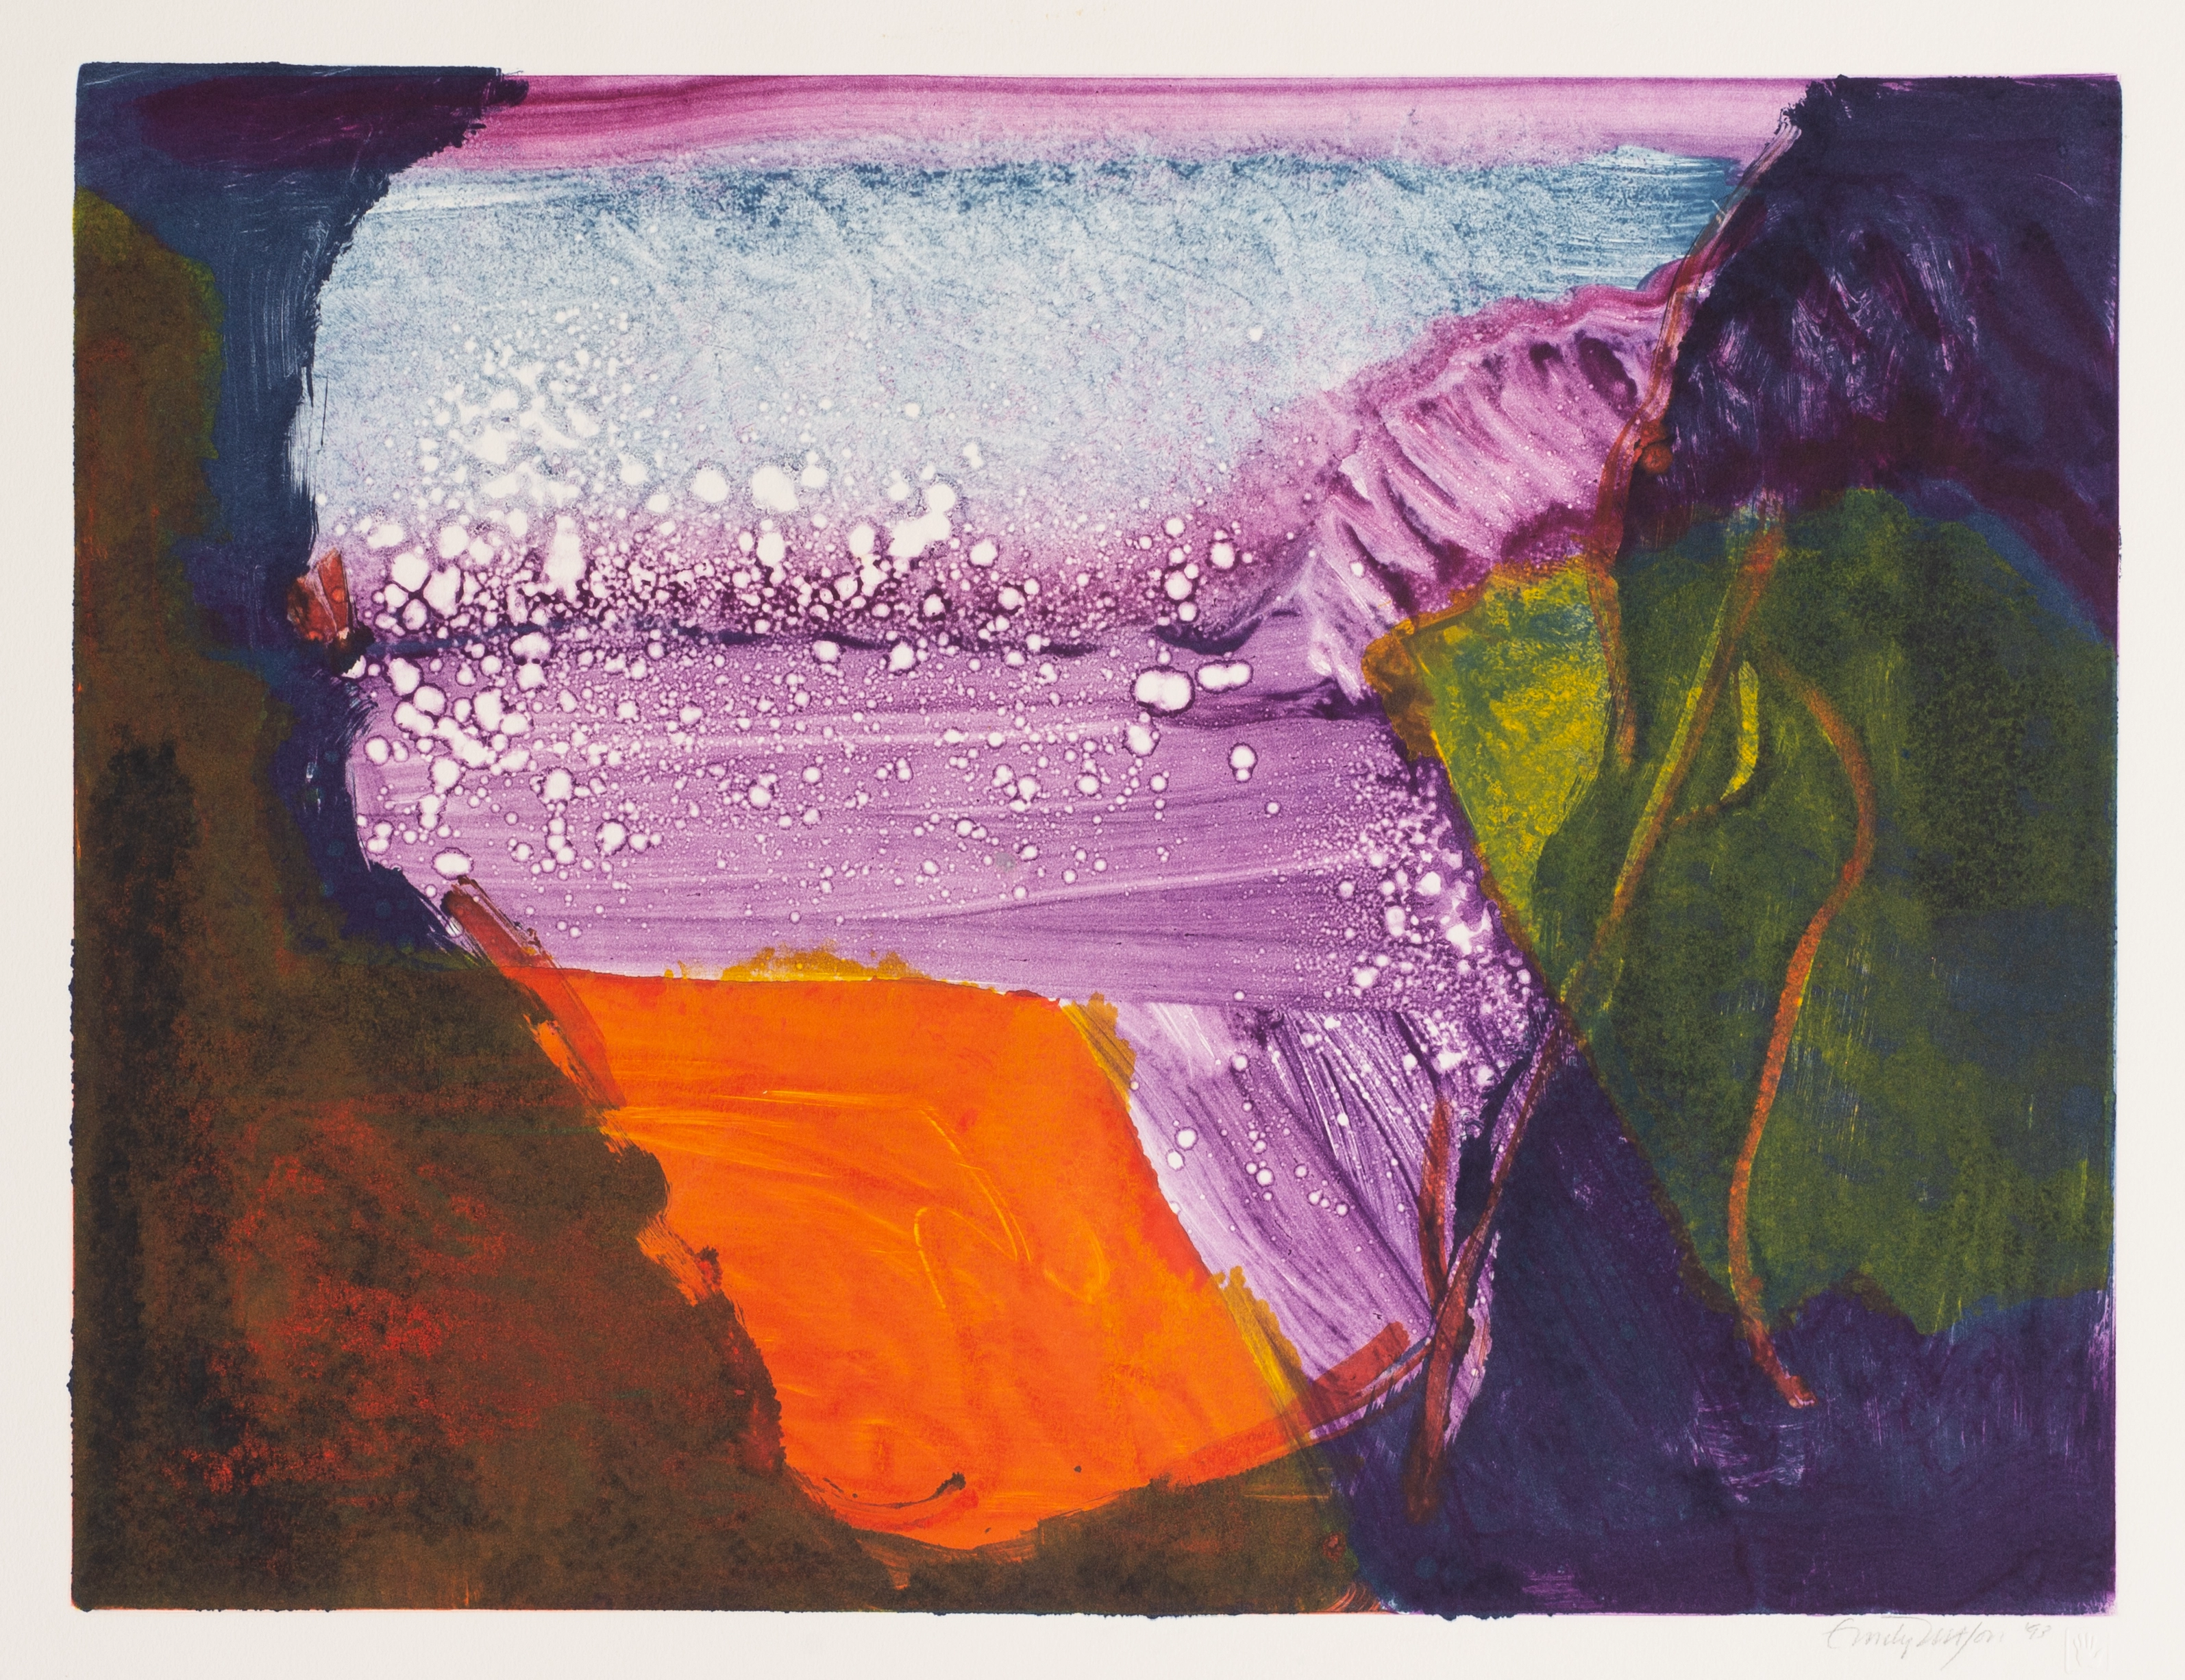 Monotype on paper with a large V-shaped form in the center made of light blue, purple, and orange in the background; a streaky brown-green form borders this V-shape